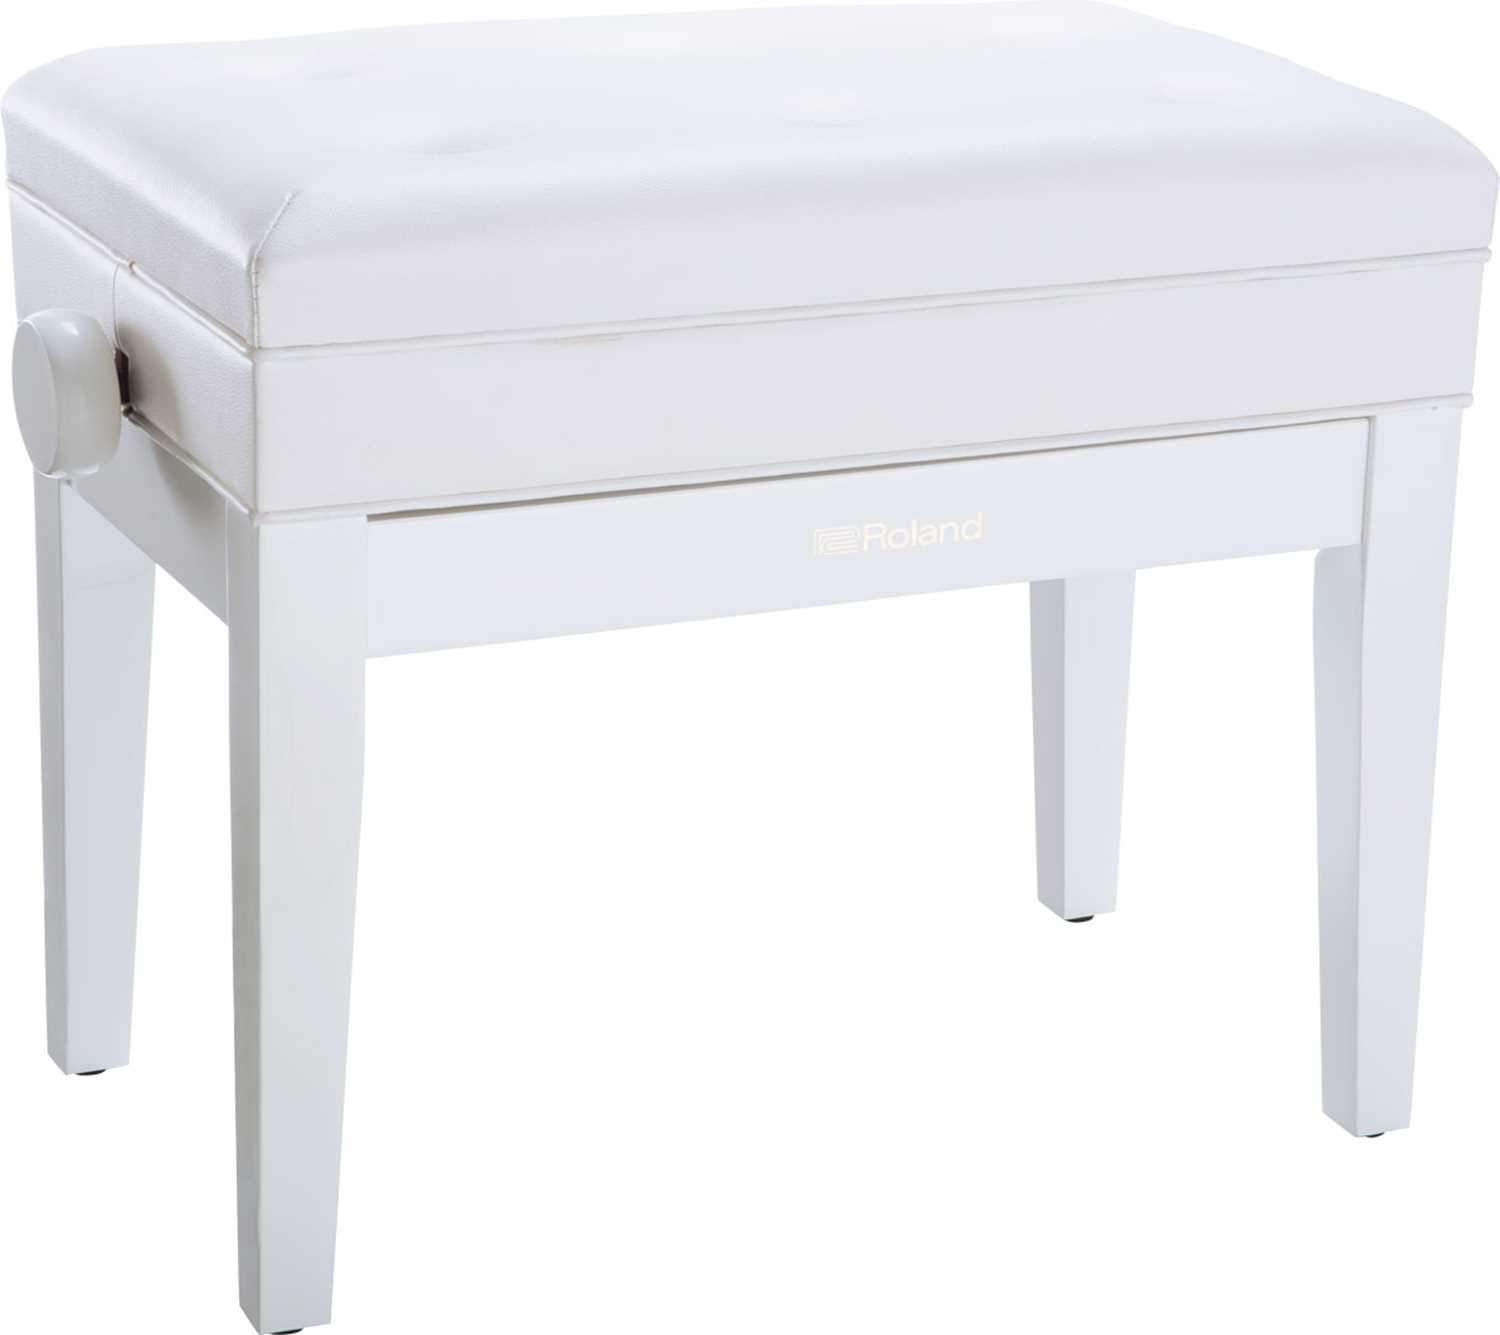 Roland RPB-400PW Piano Bench Polished White Vinyl - PSSL ProSound and Stage Lighting